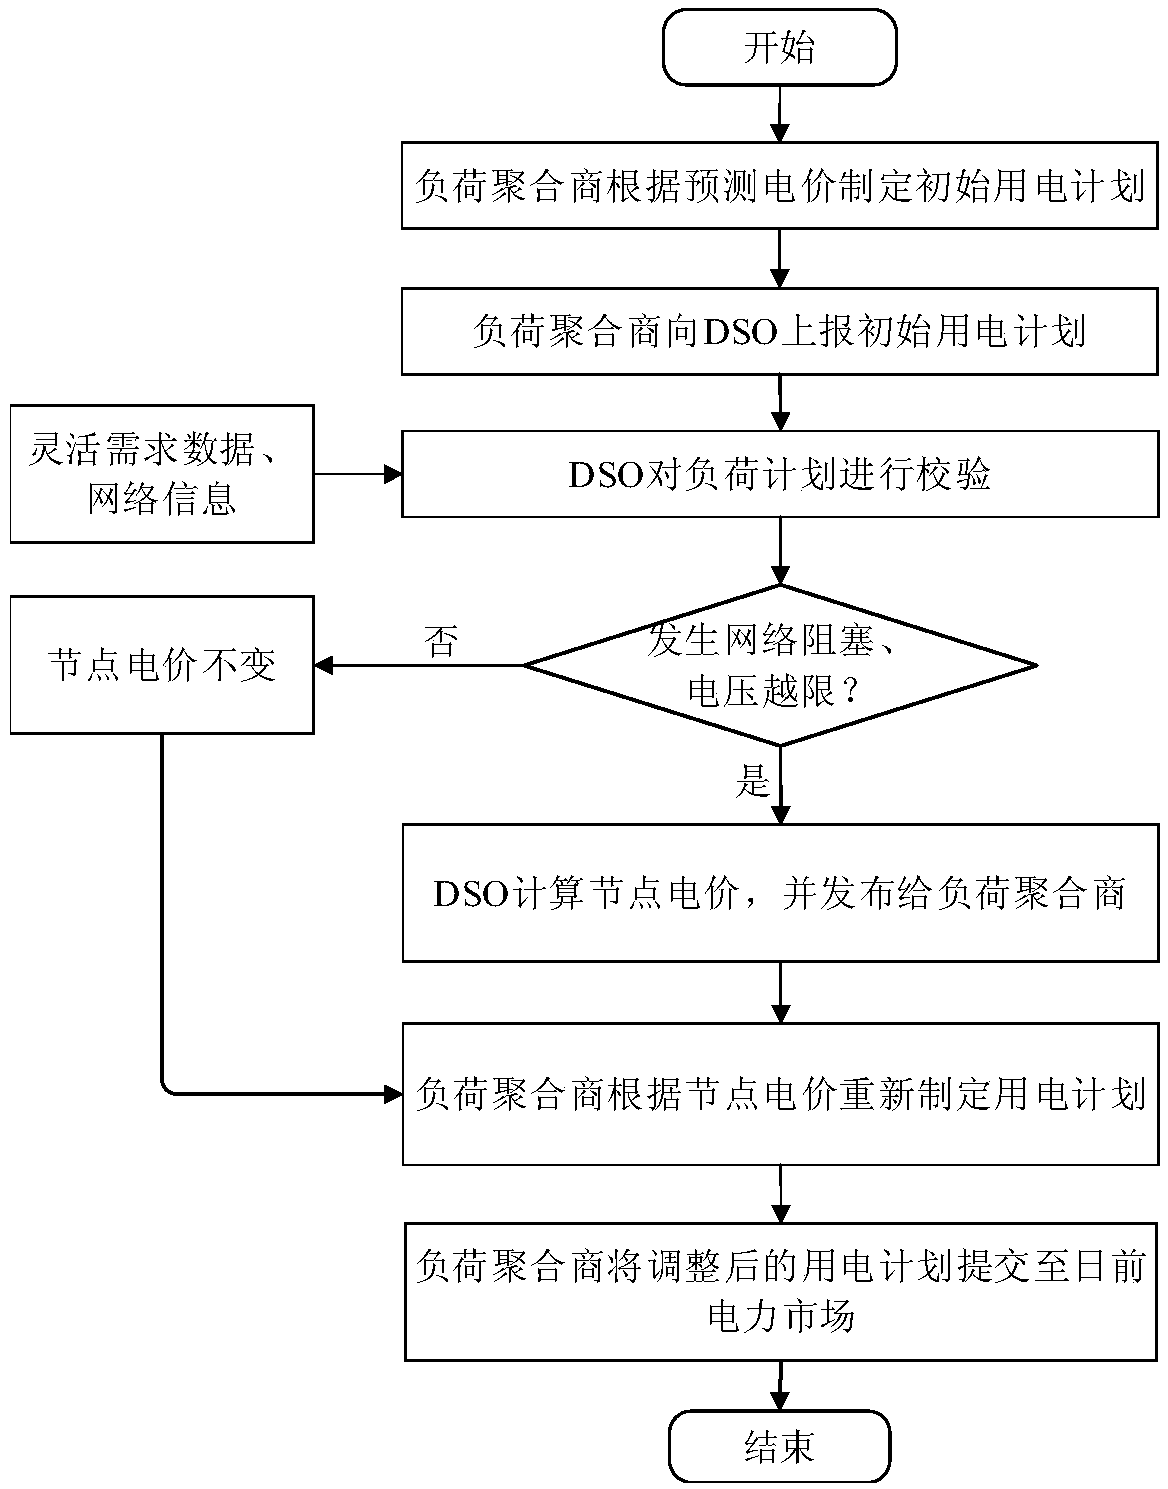 Meter and power distribution network node electricity price calculation method for electromobile and heat pump